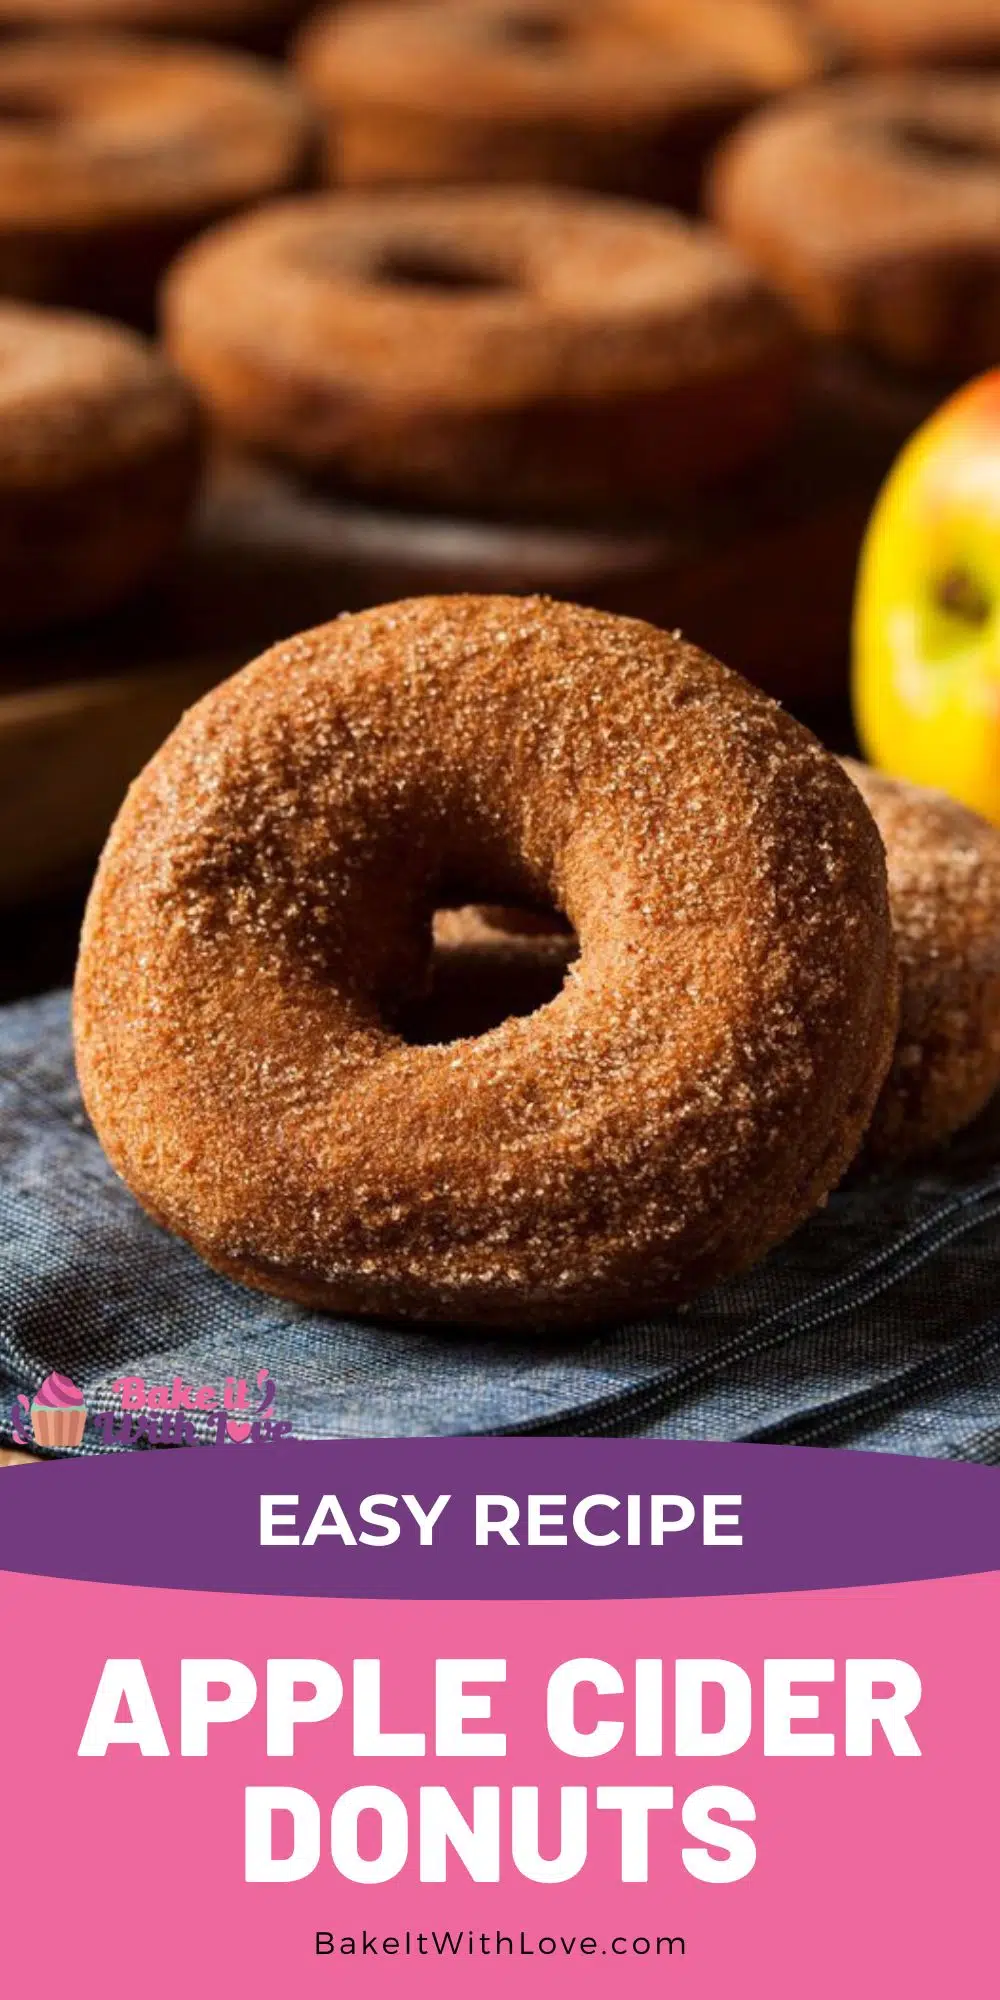 Pin image of apple cider donuts.